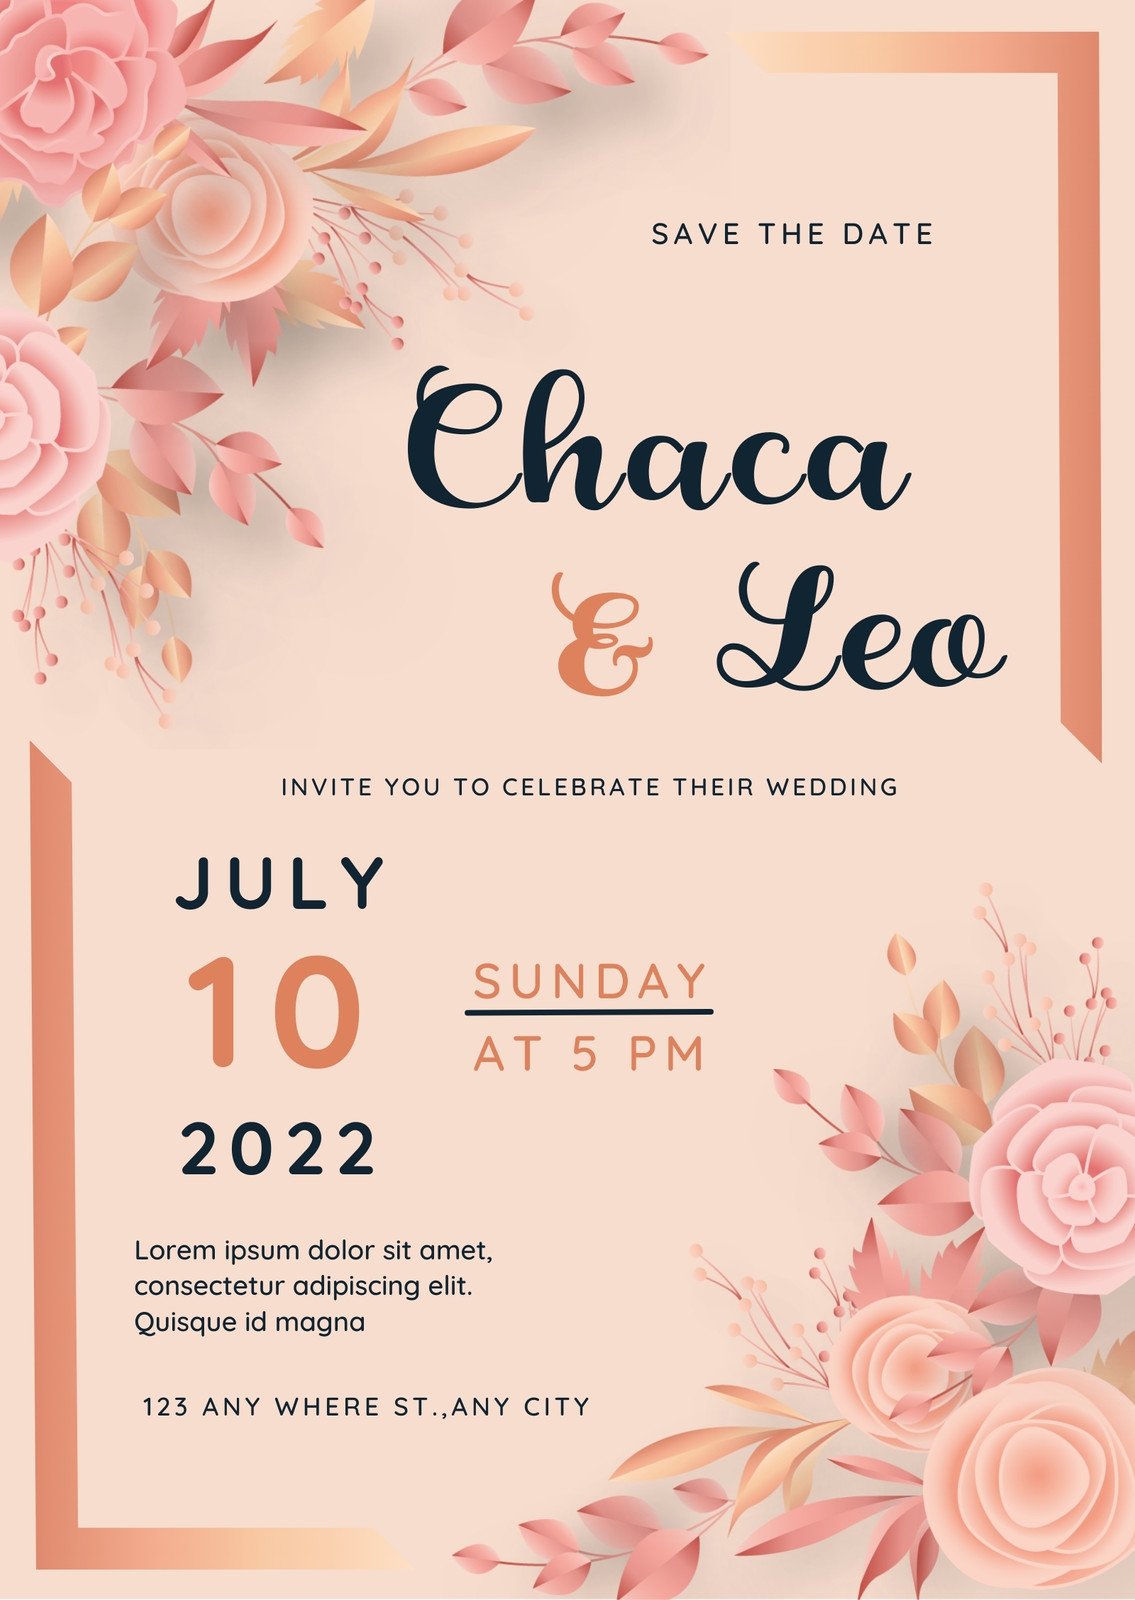 Save the Date Cards  Personalize & Order Prints from Canva